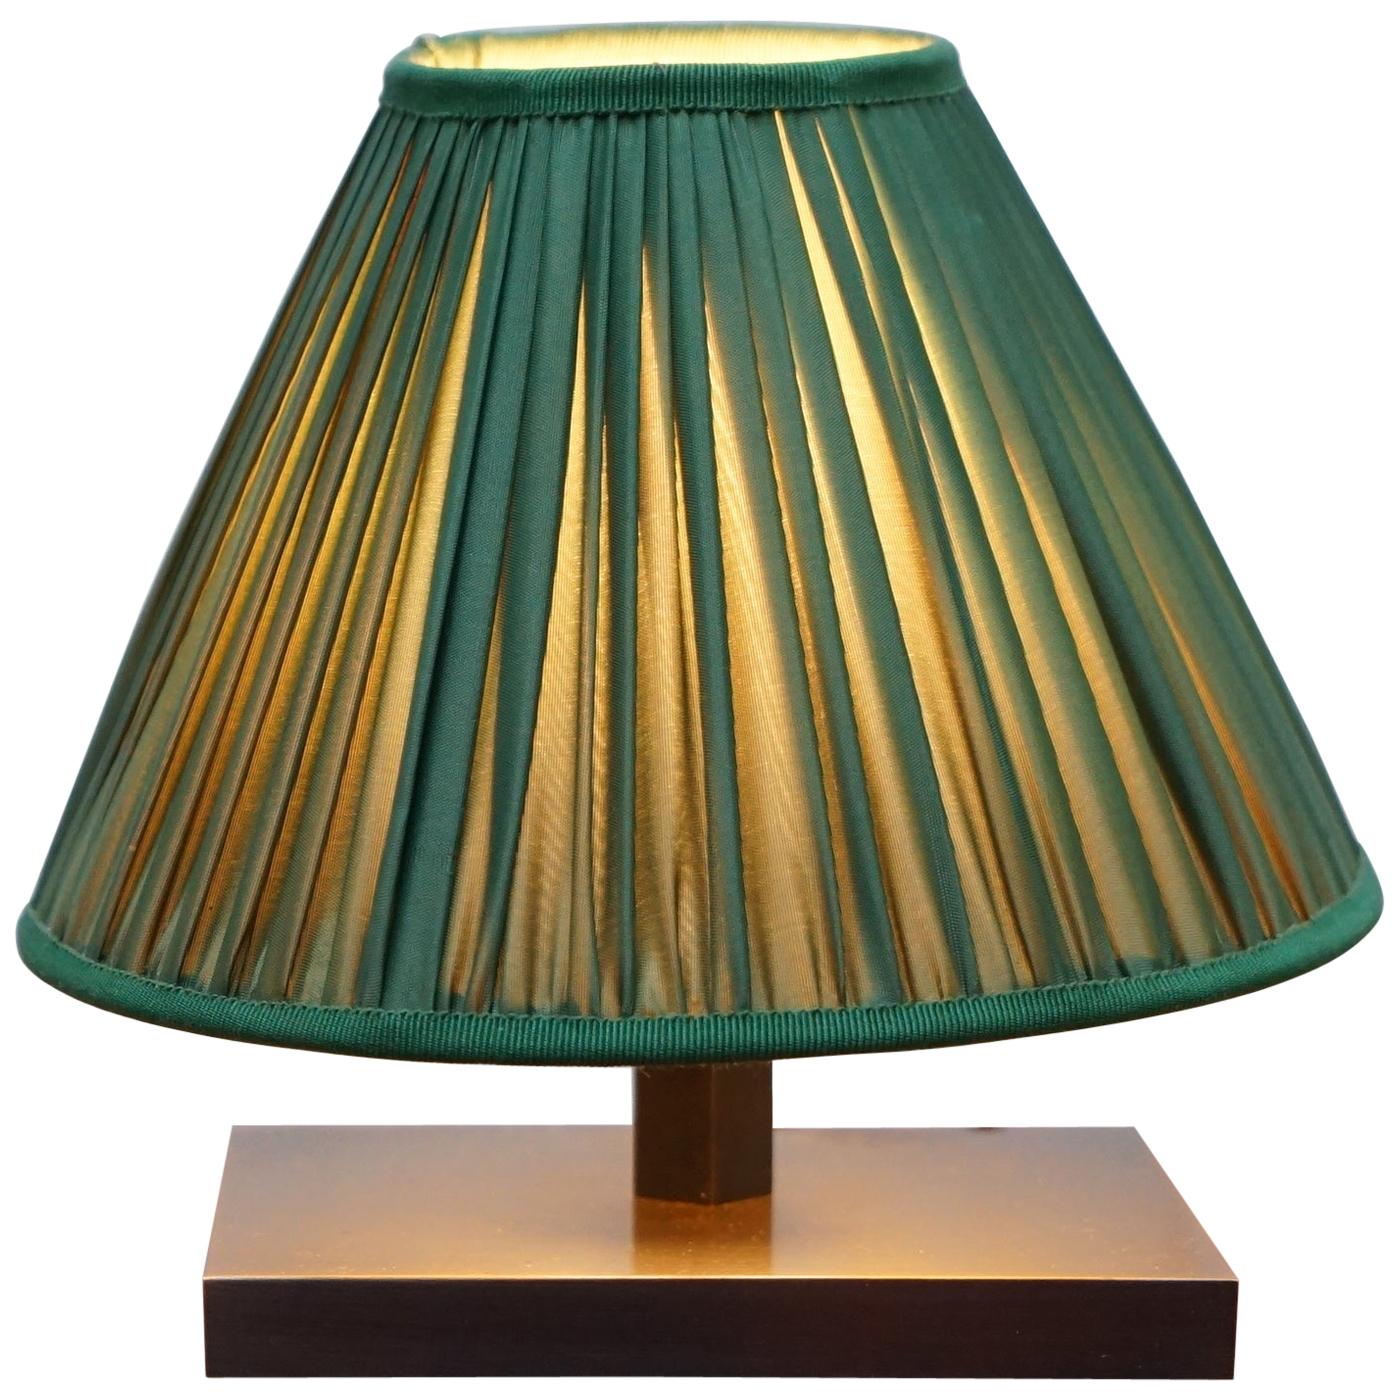 Lovely Small Table Lamp with Cast Metal Base and Green Shade Good Light Transfer